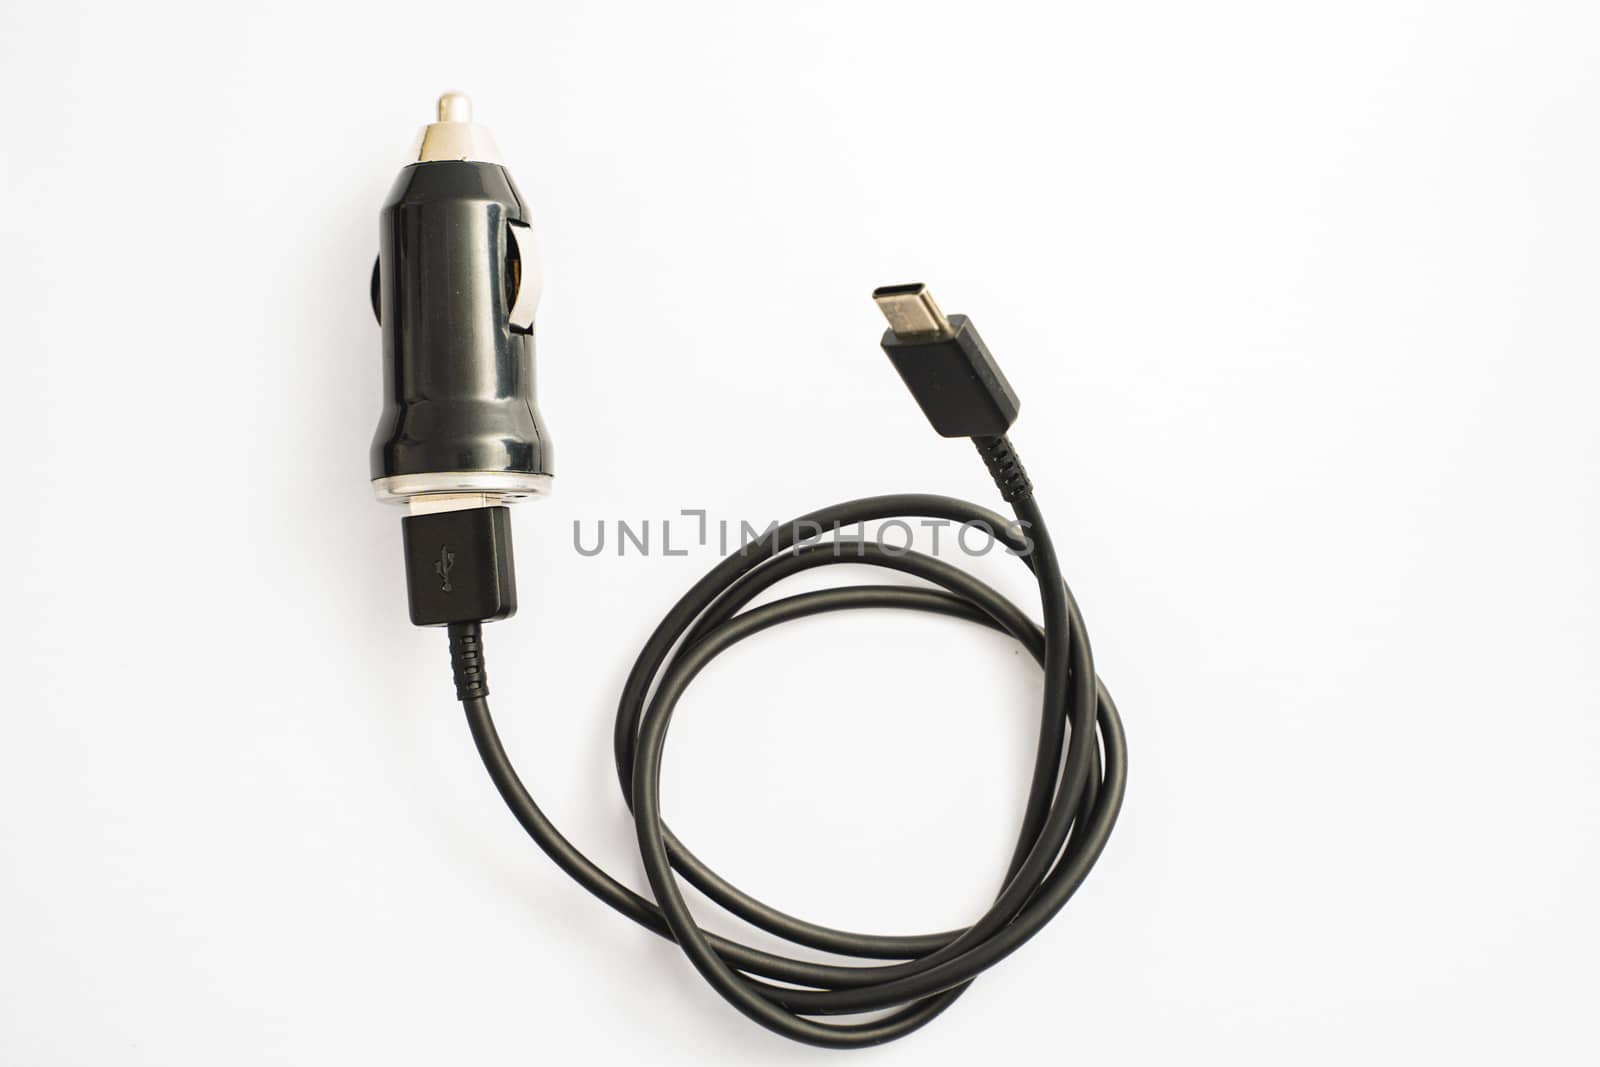 black car charger with USB output connection cable. A photo taken on a black car charger with USB output connection cable against a white backdrop by peerapixs